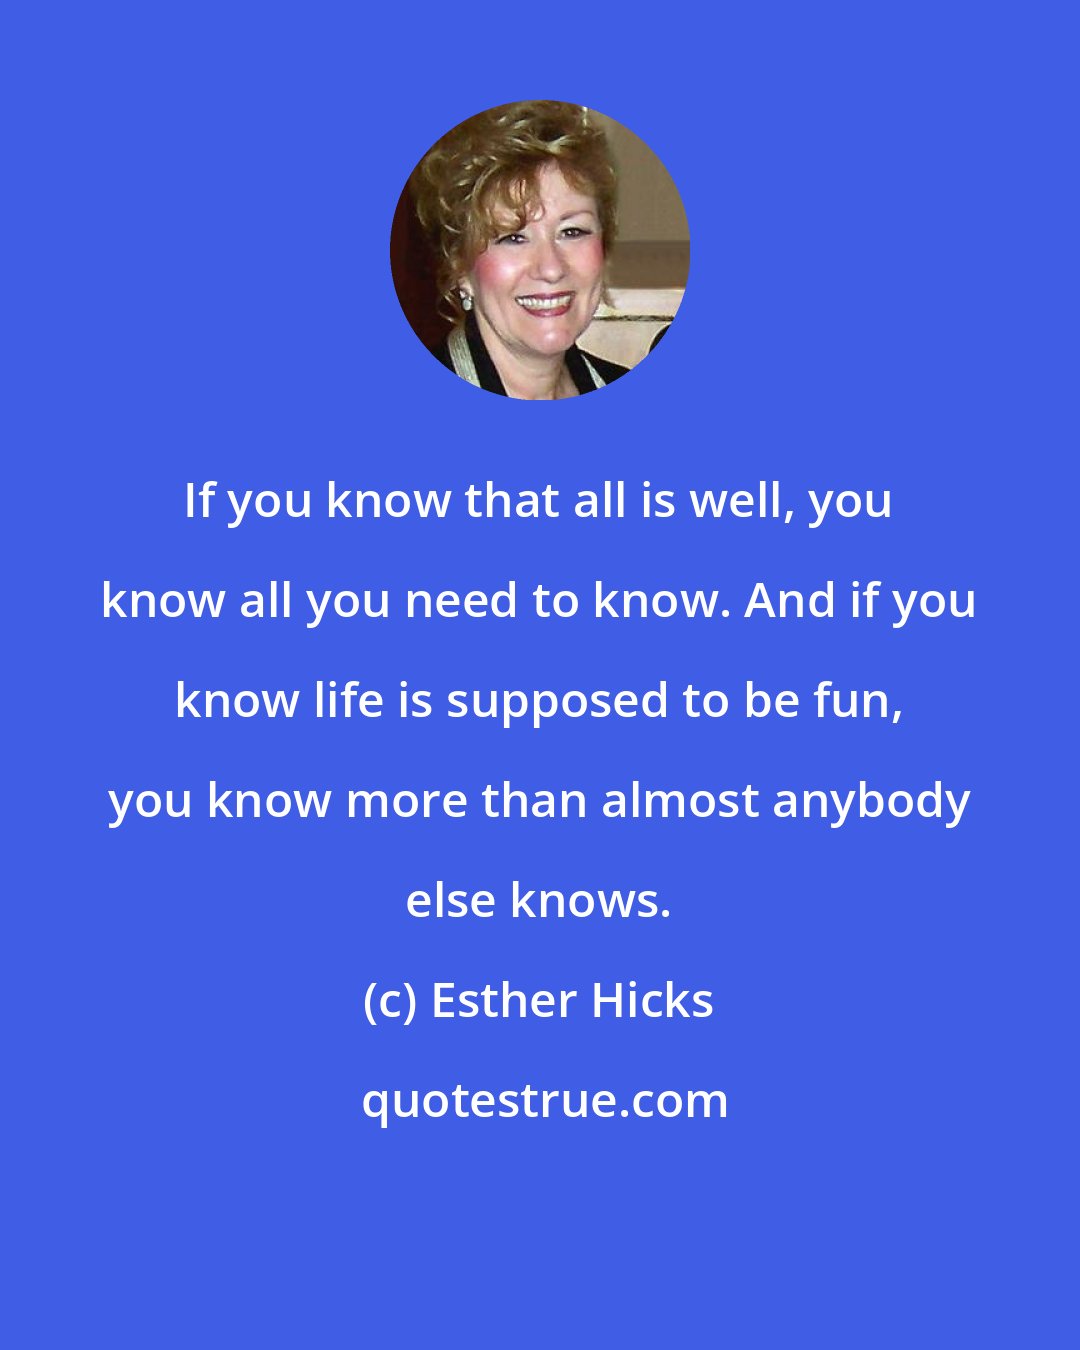 Esther Hicks: If you know that all is well, you know all you need to know. And if you know life is supposed to be fun, you know more than almost anybody else knows.